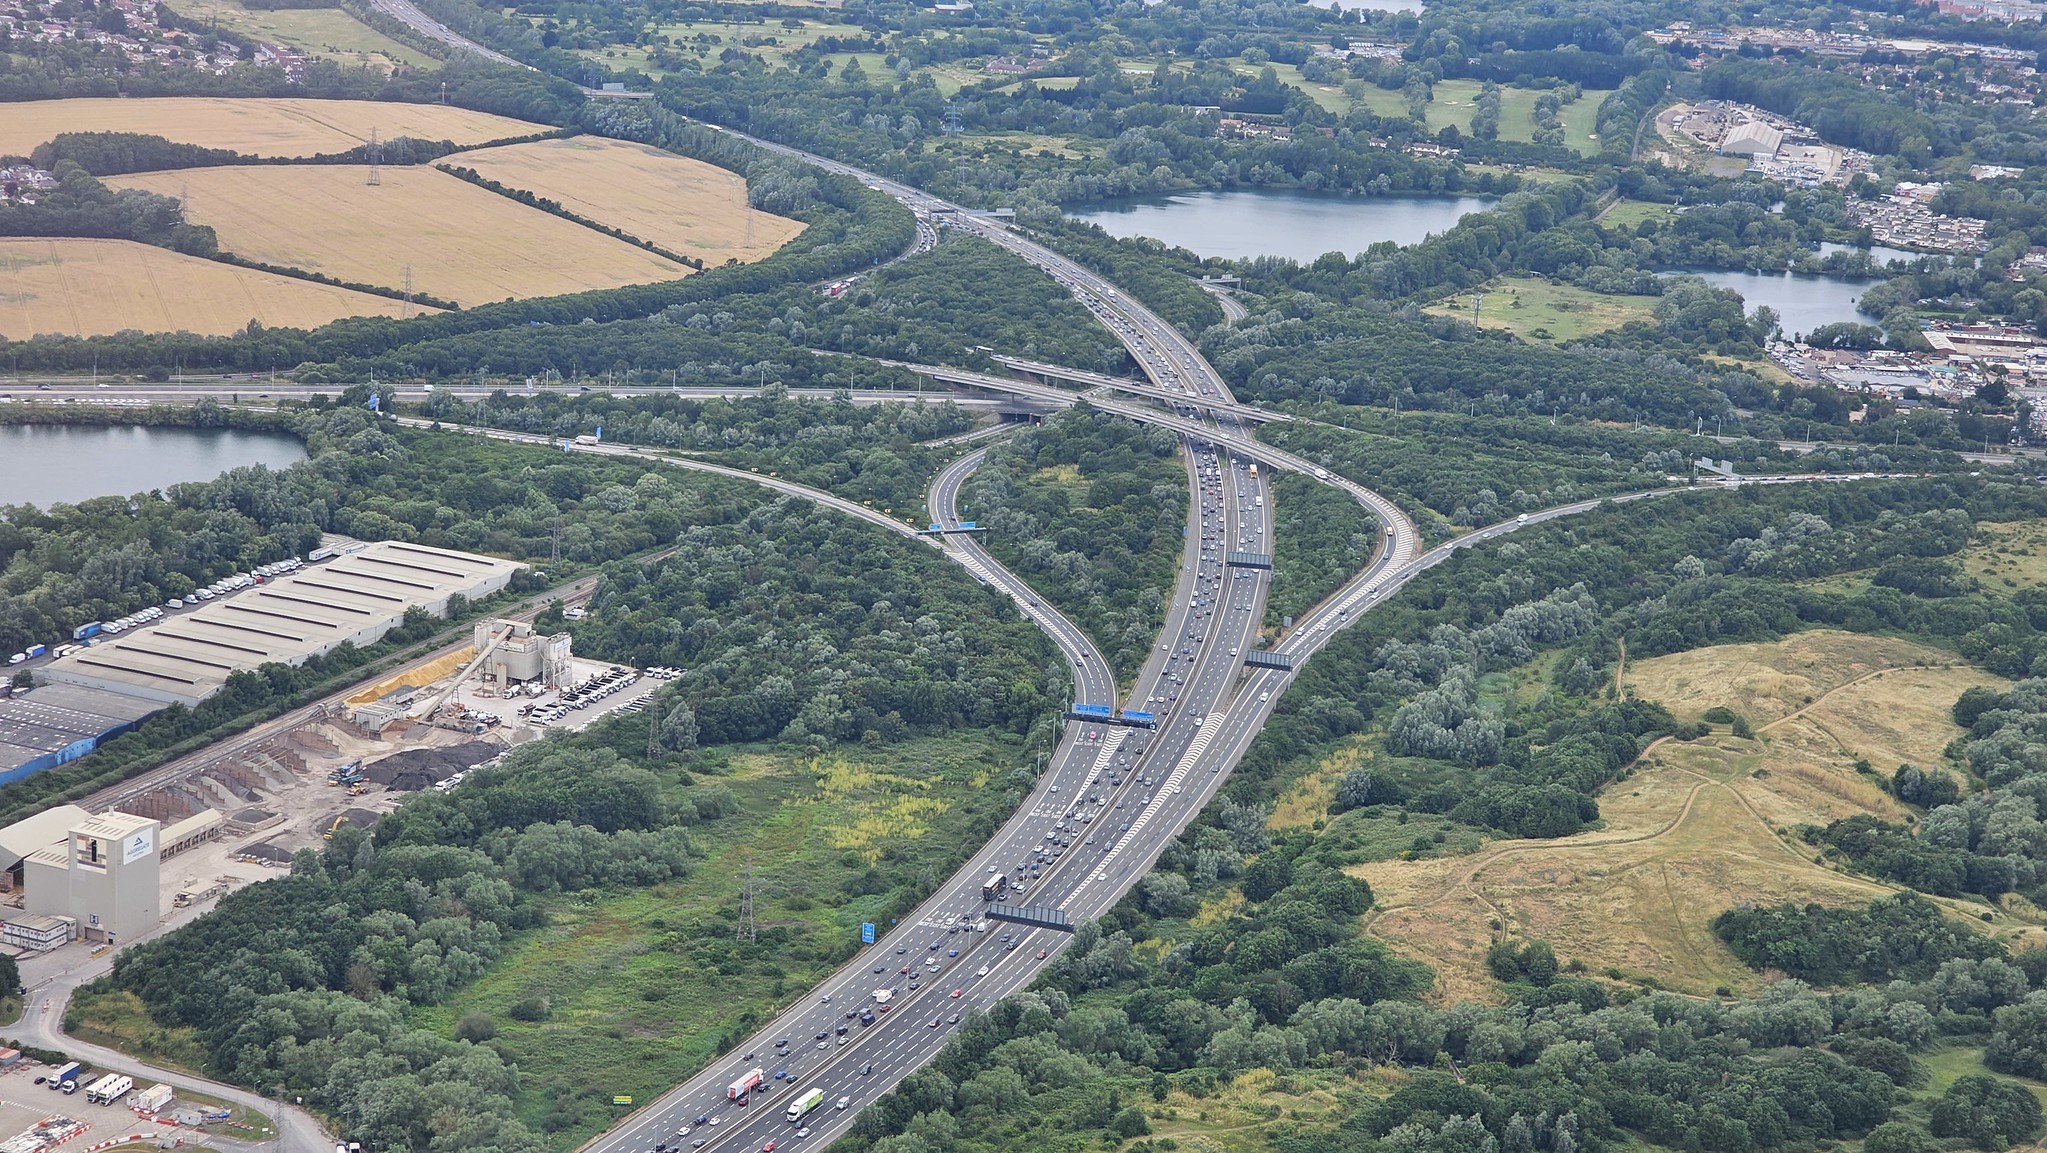 Initial views of the M25 after taking off from Heathrow